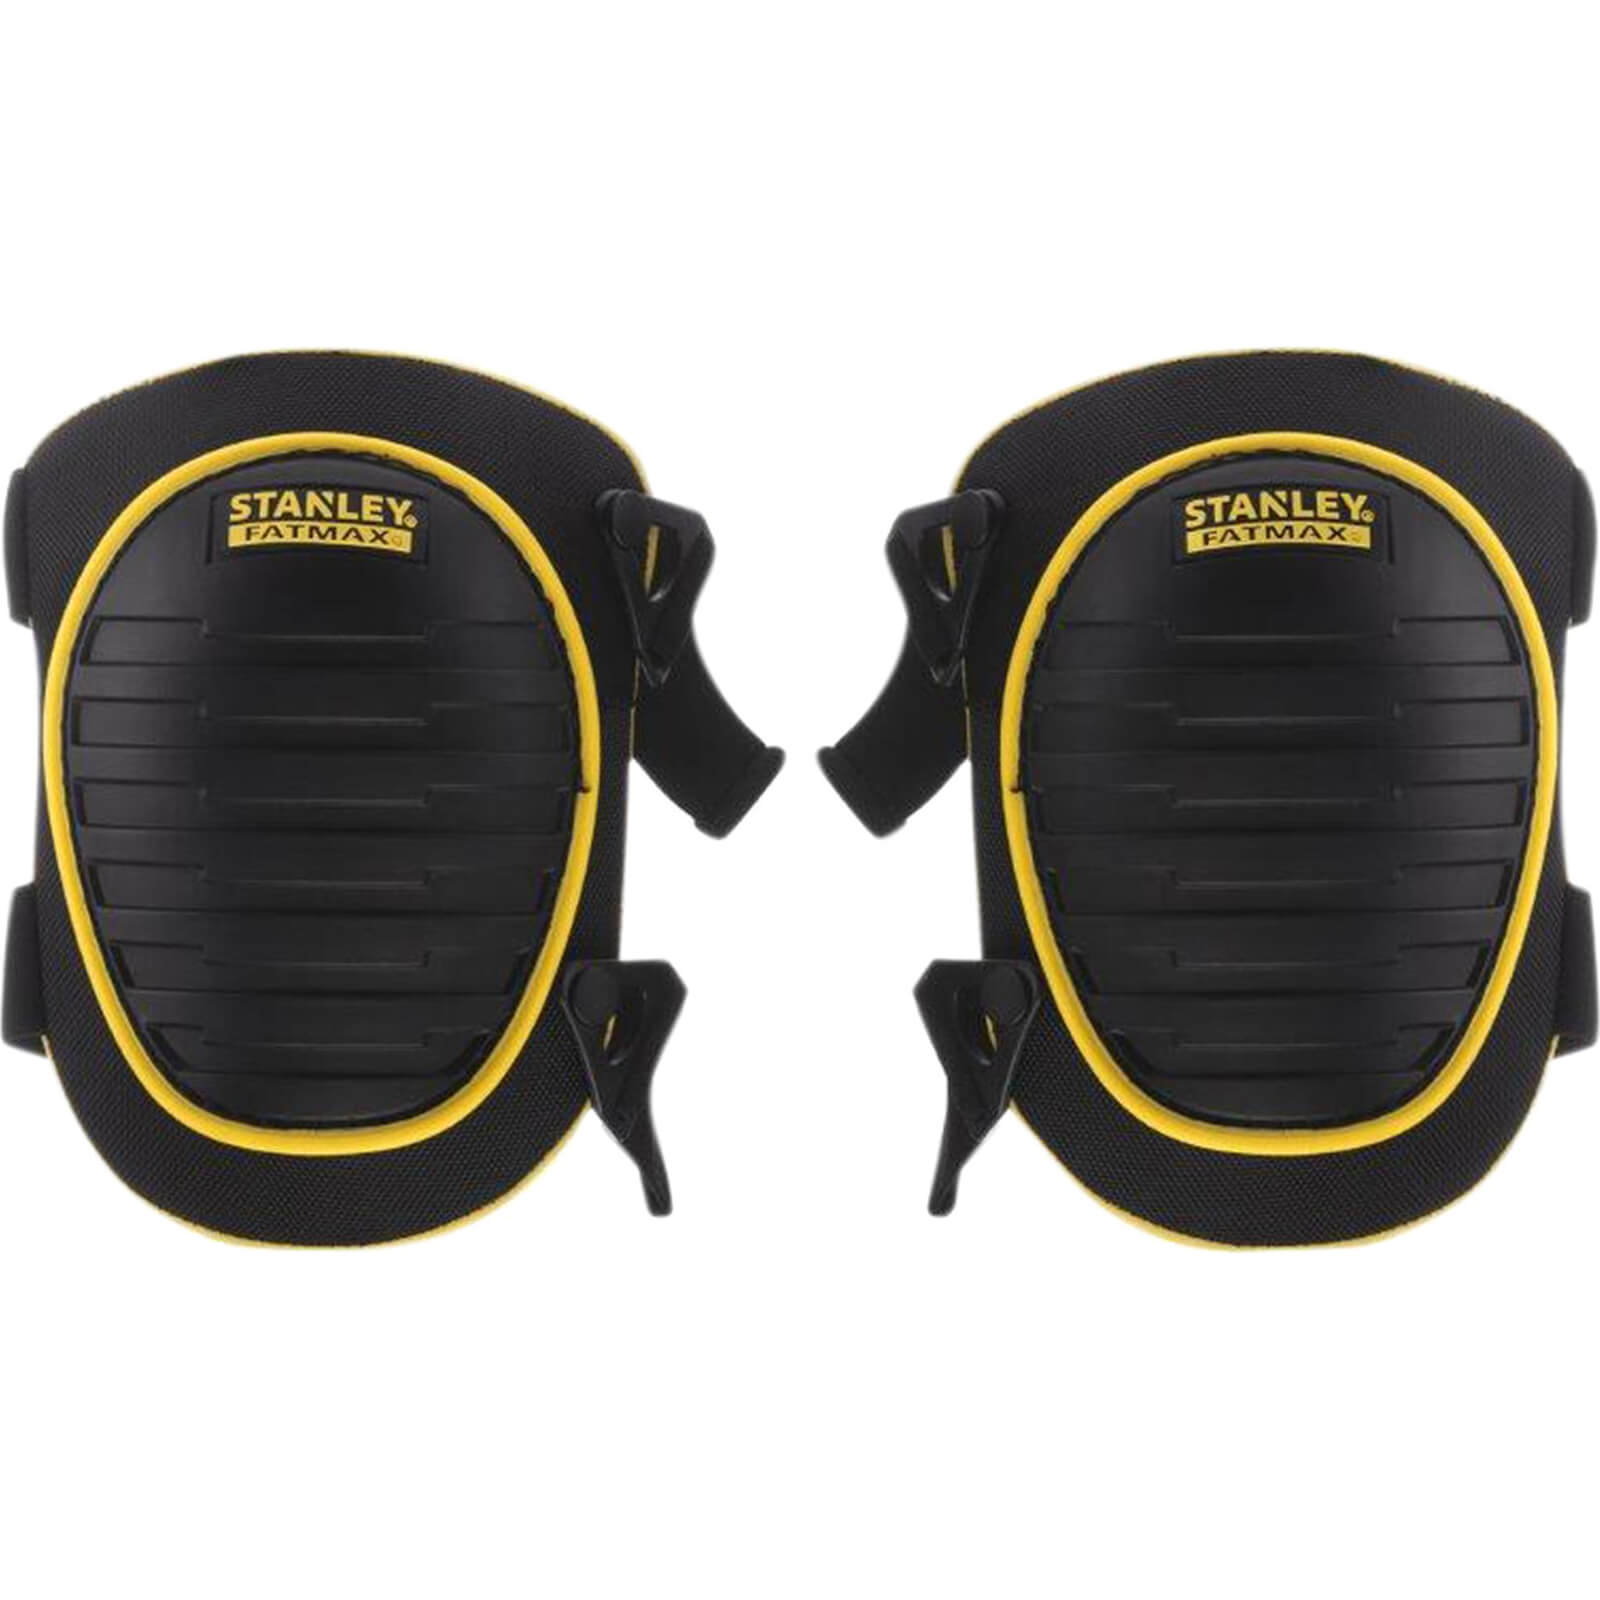 Image of Stanley Fatmax Hard Shell Tactical Knee Pads